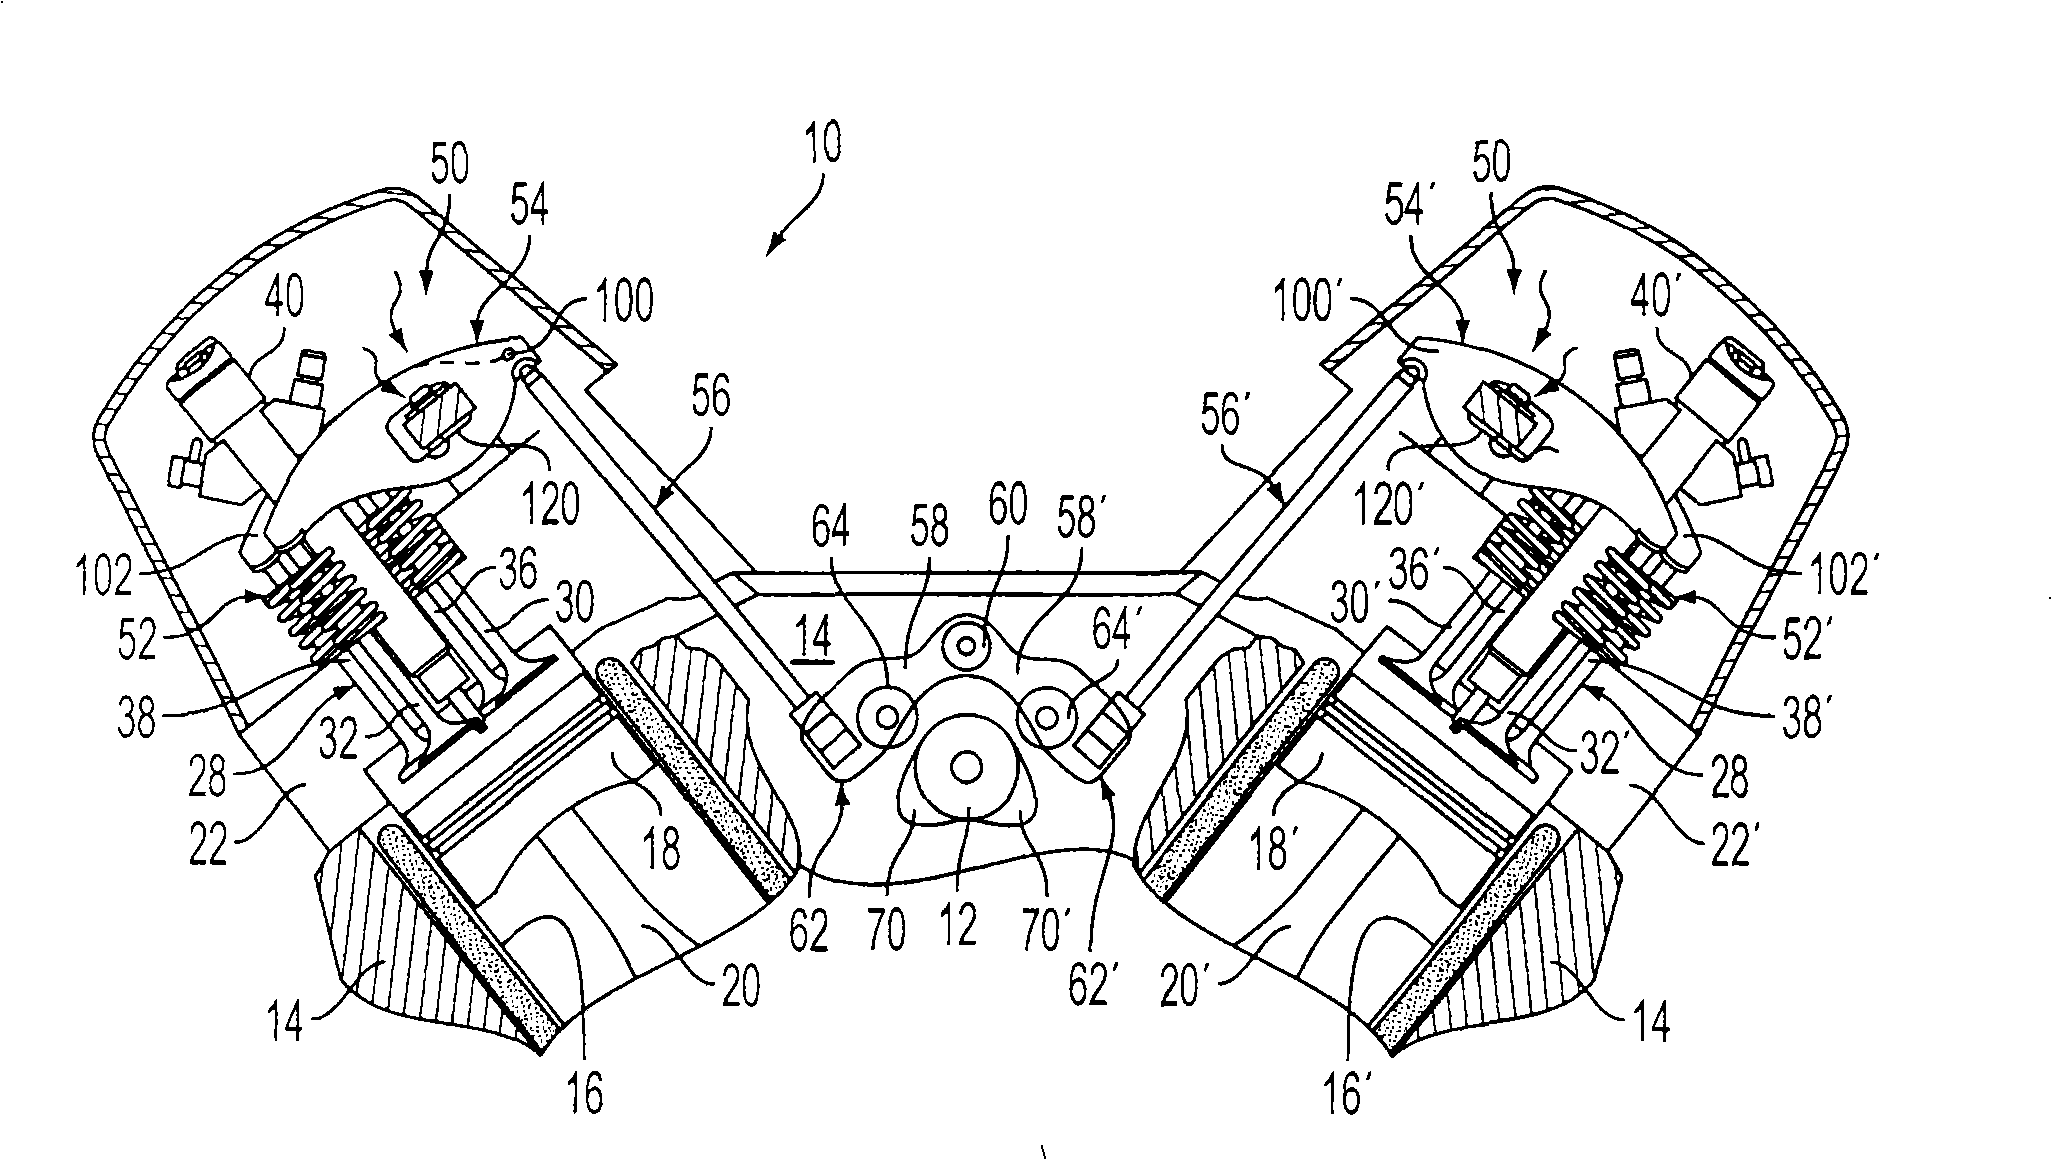 Engine/valvetrain with shaft-mounted cam followers having dual independent lash adjusters